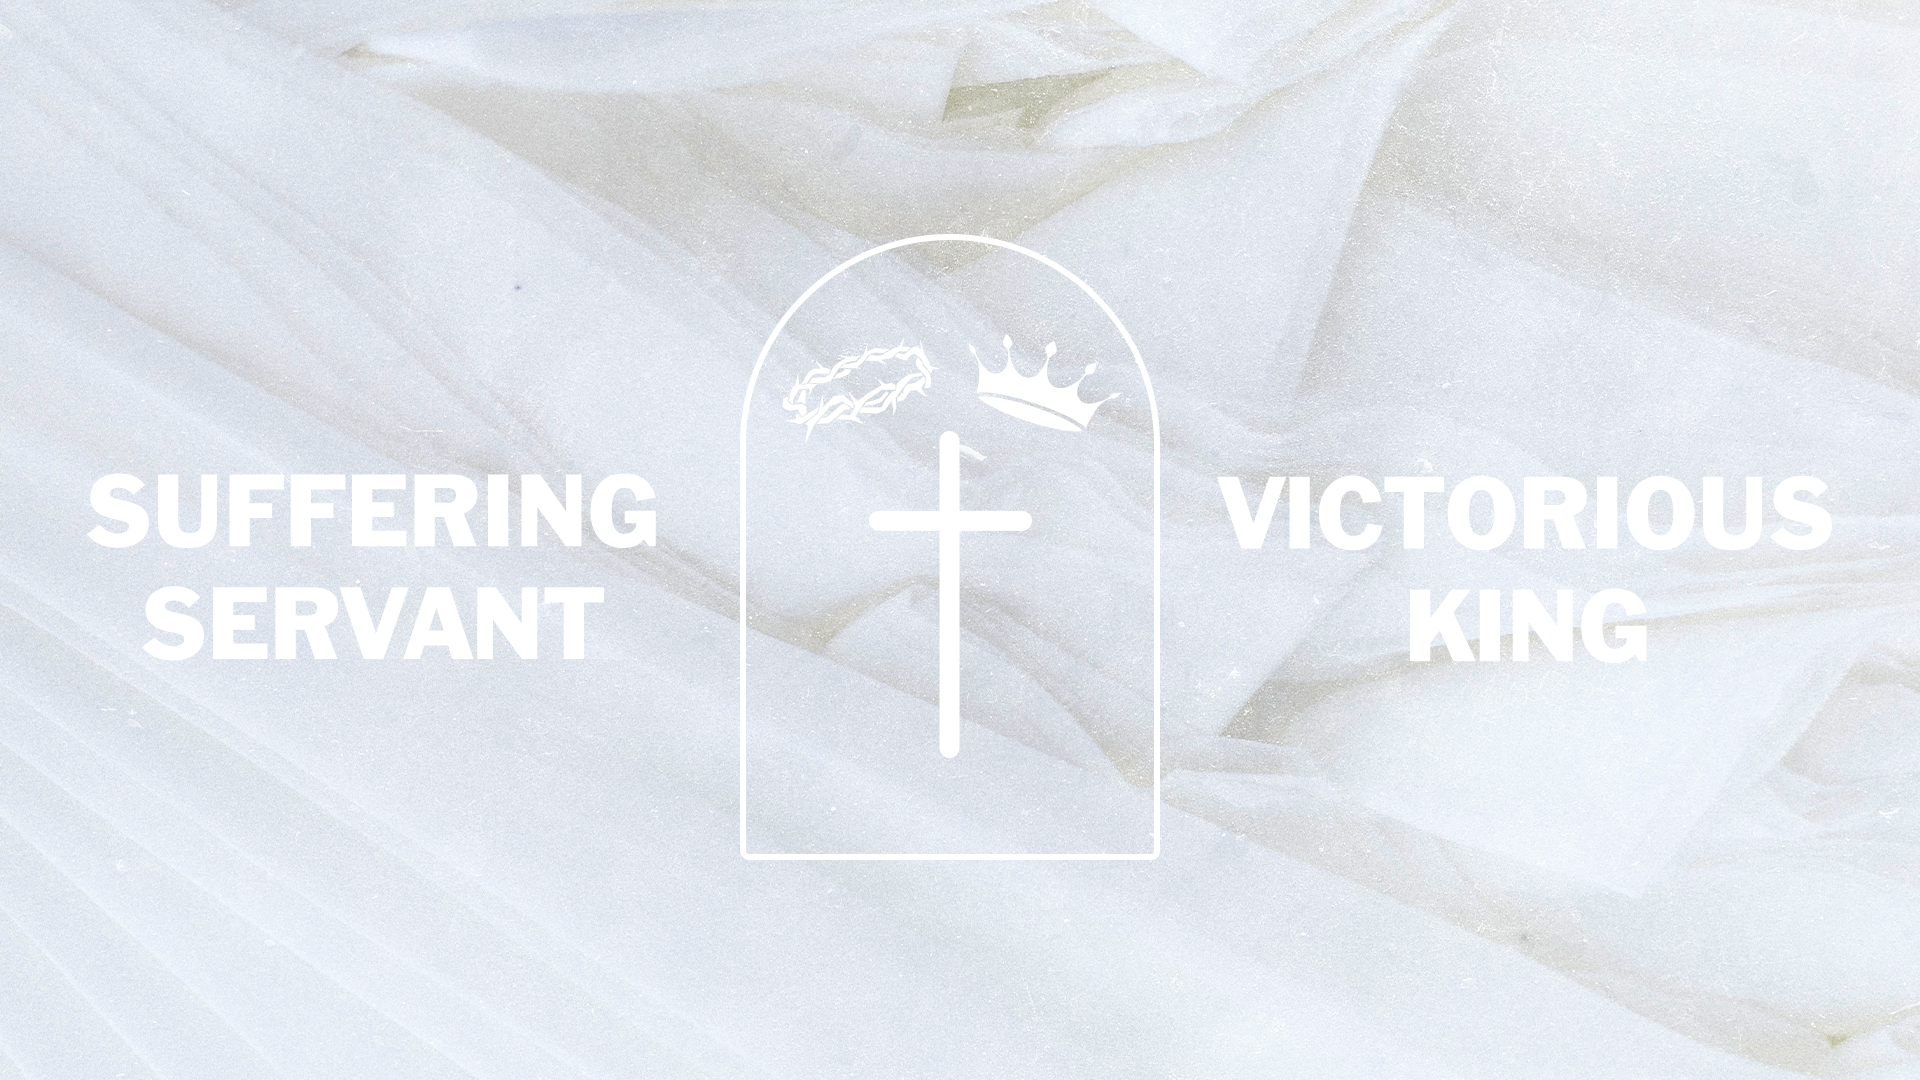 Suffering Servant, Victorious King Pt. 4